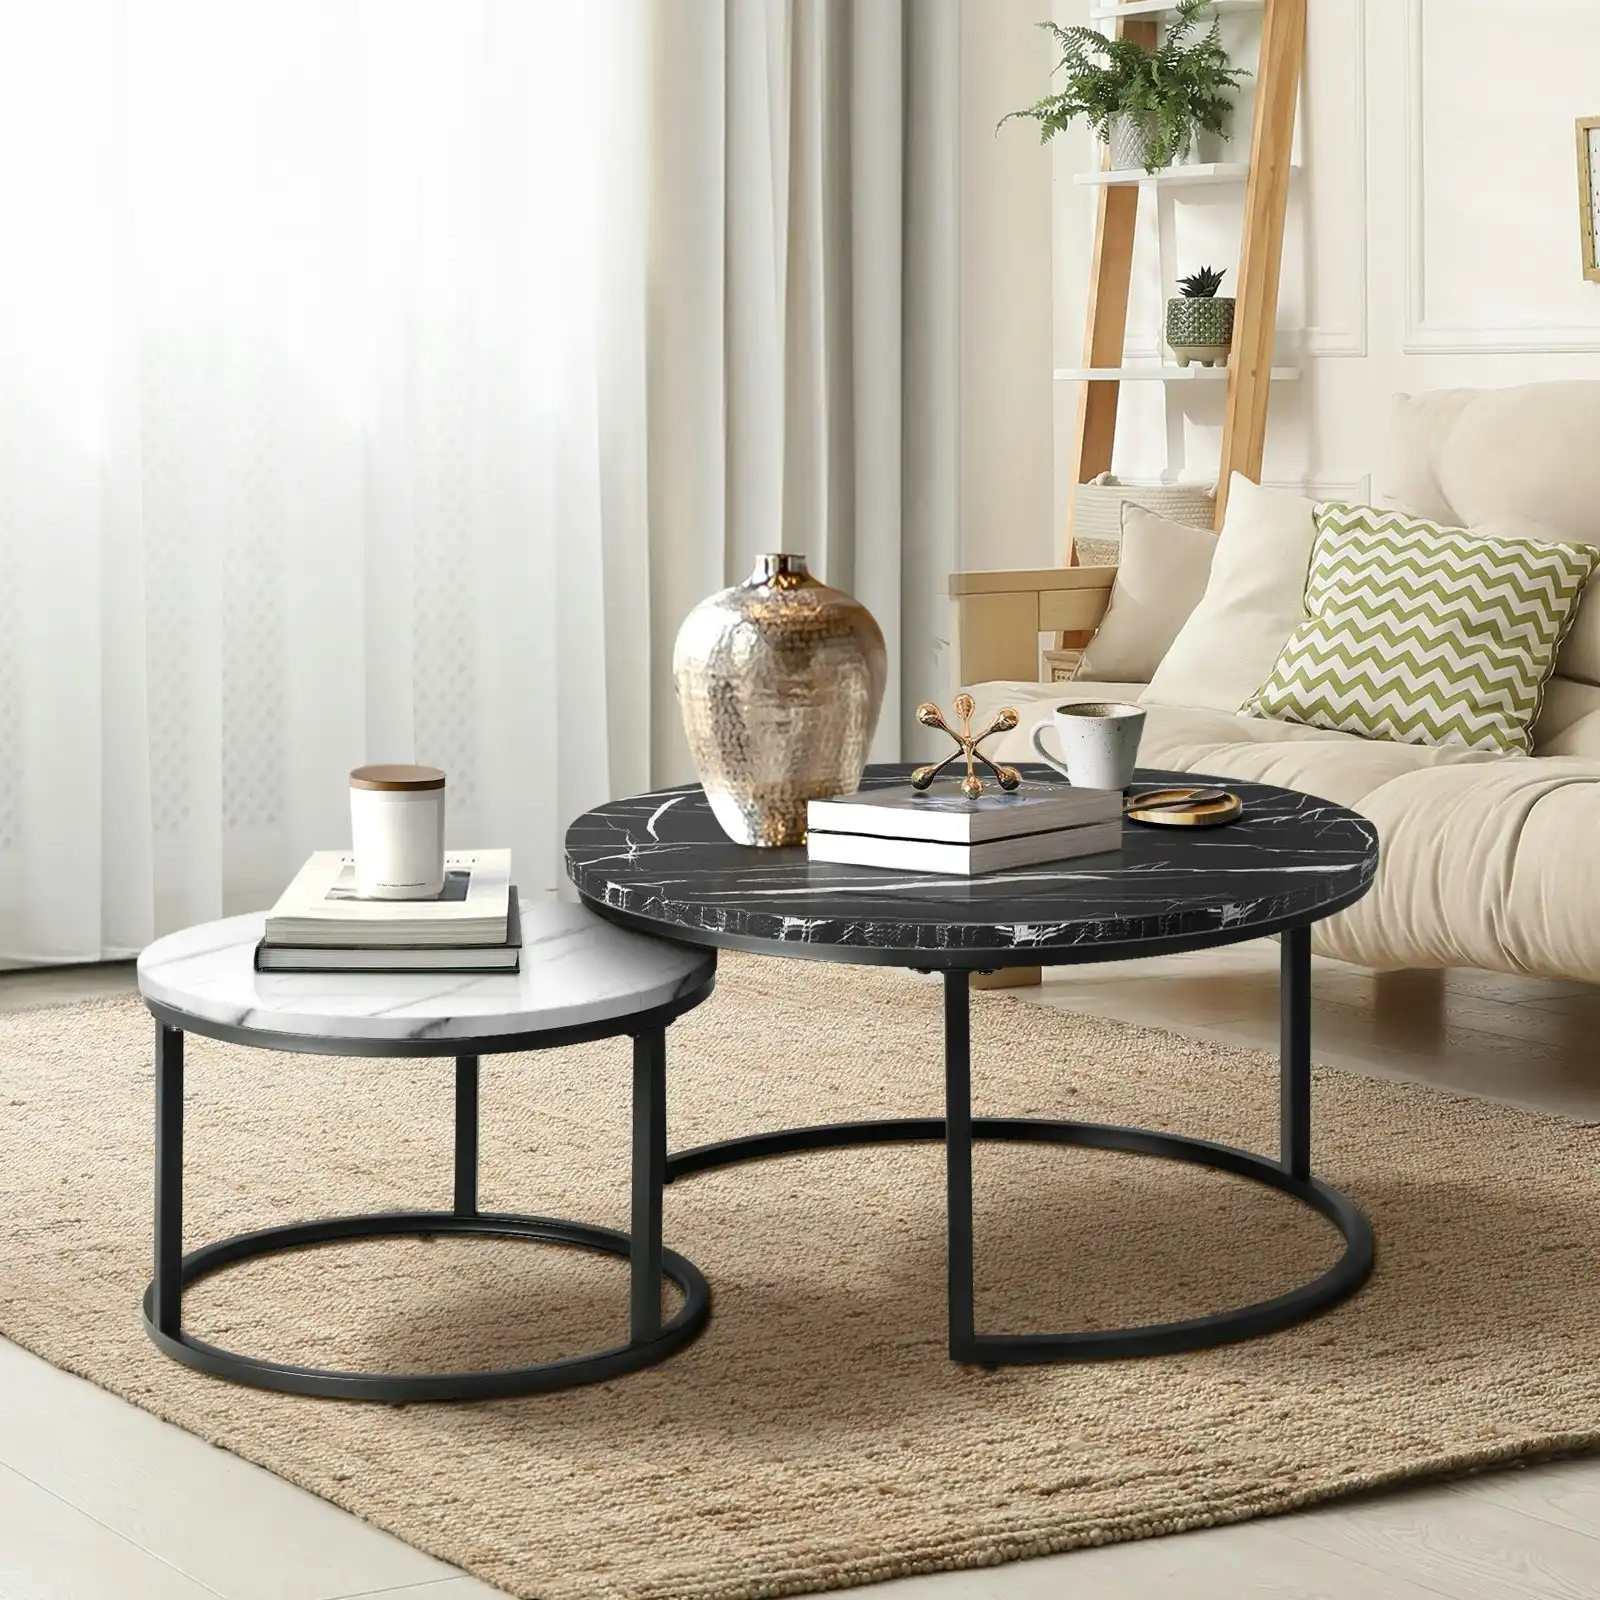 Oikiture Set of 2 Coffee Table Round Marble Nesting Side End Tables Black White